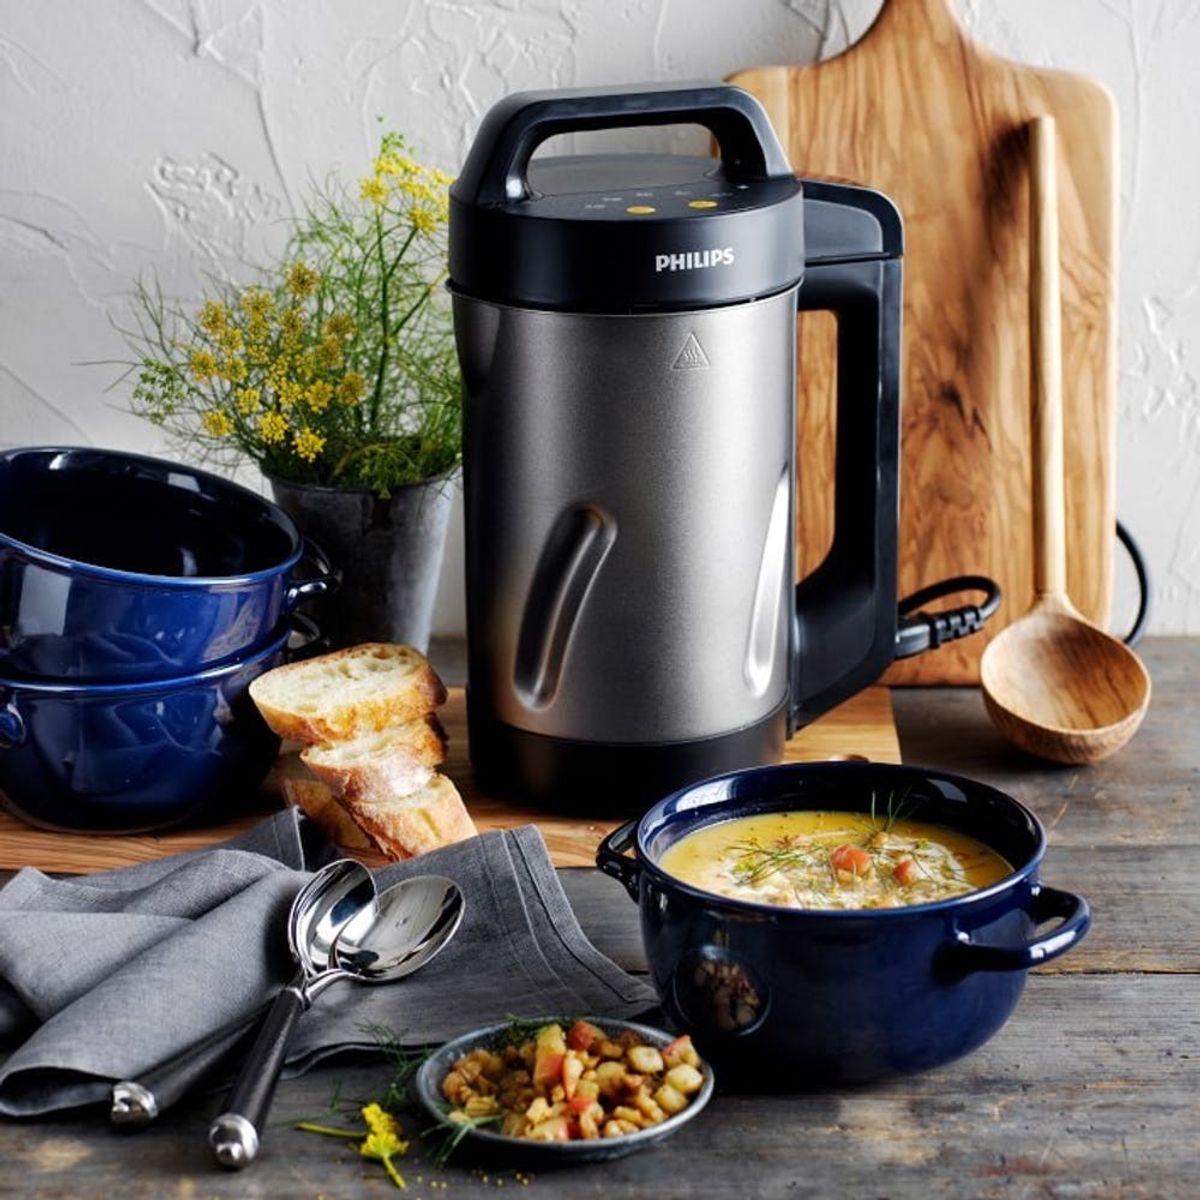 This Electric Soup Maker May Be the Best Thing Since Canned Campbell’s